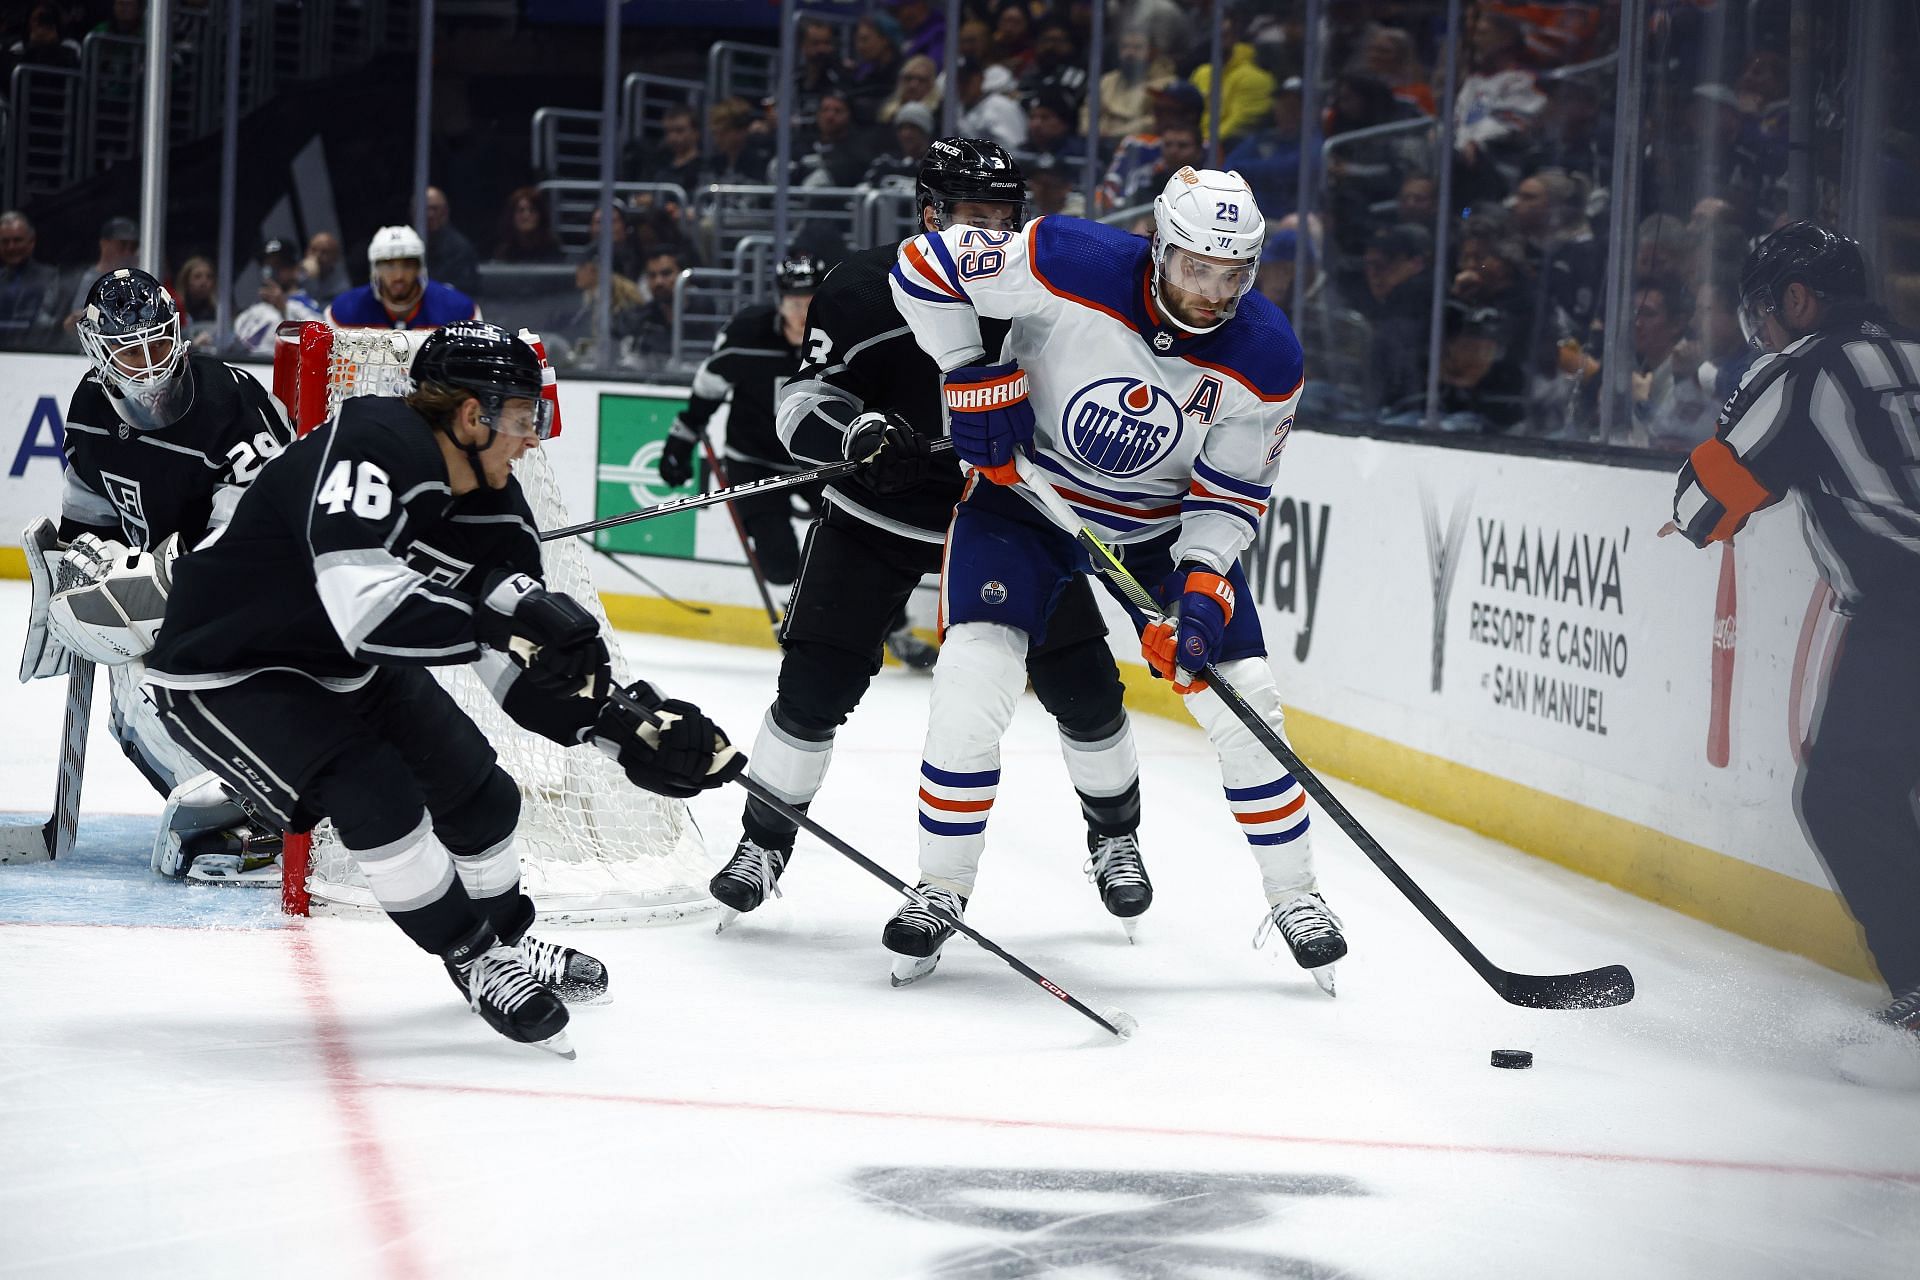 Edmonton Oilers vs Los Angeles Kings Series How to watch, TV Channel list, Live stream details and more